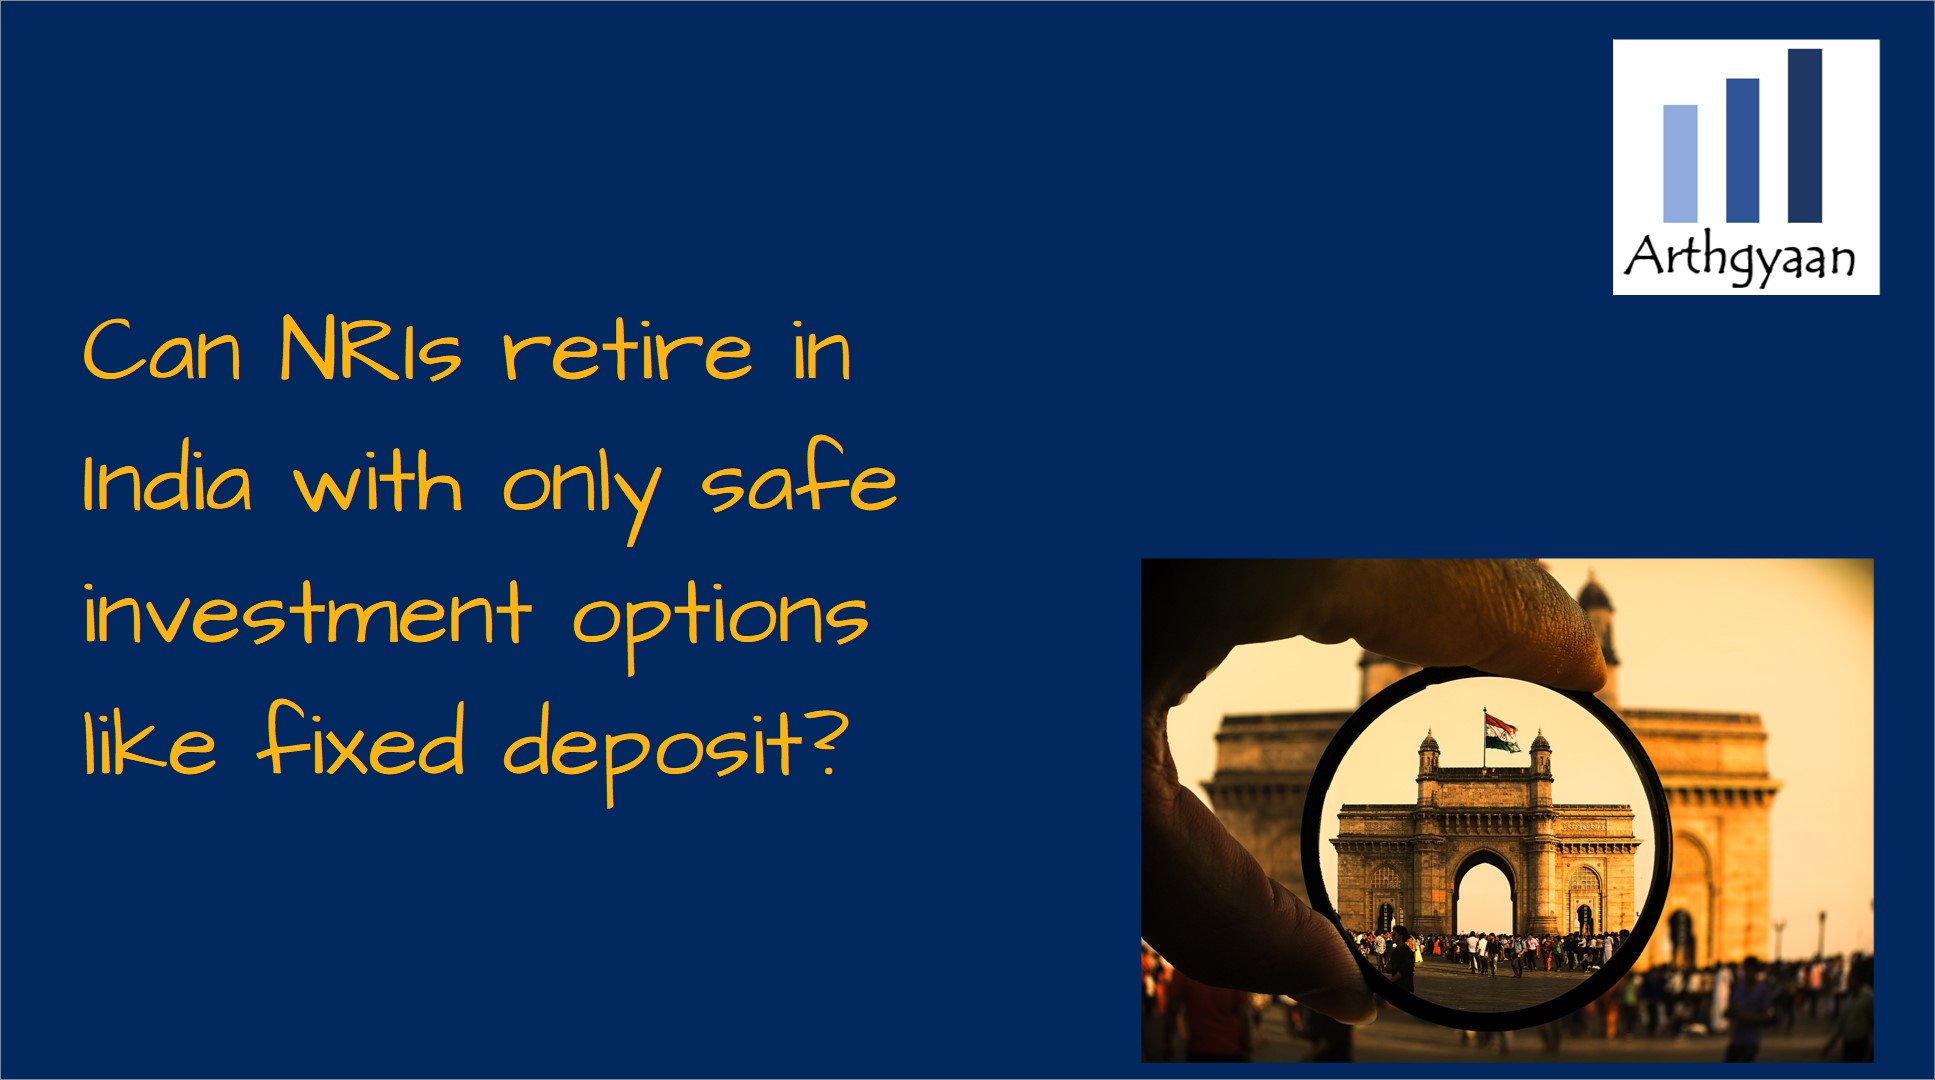 Can NRIs retire in India with only safe investment options like fixed deposit?